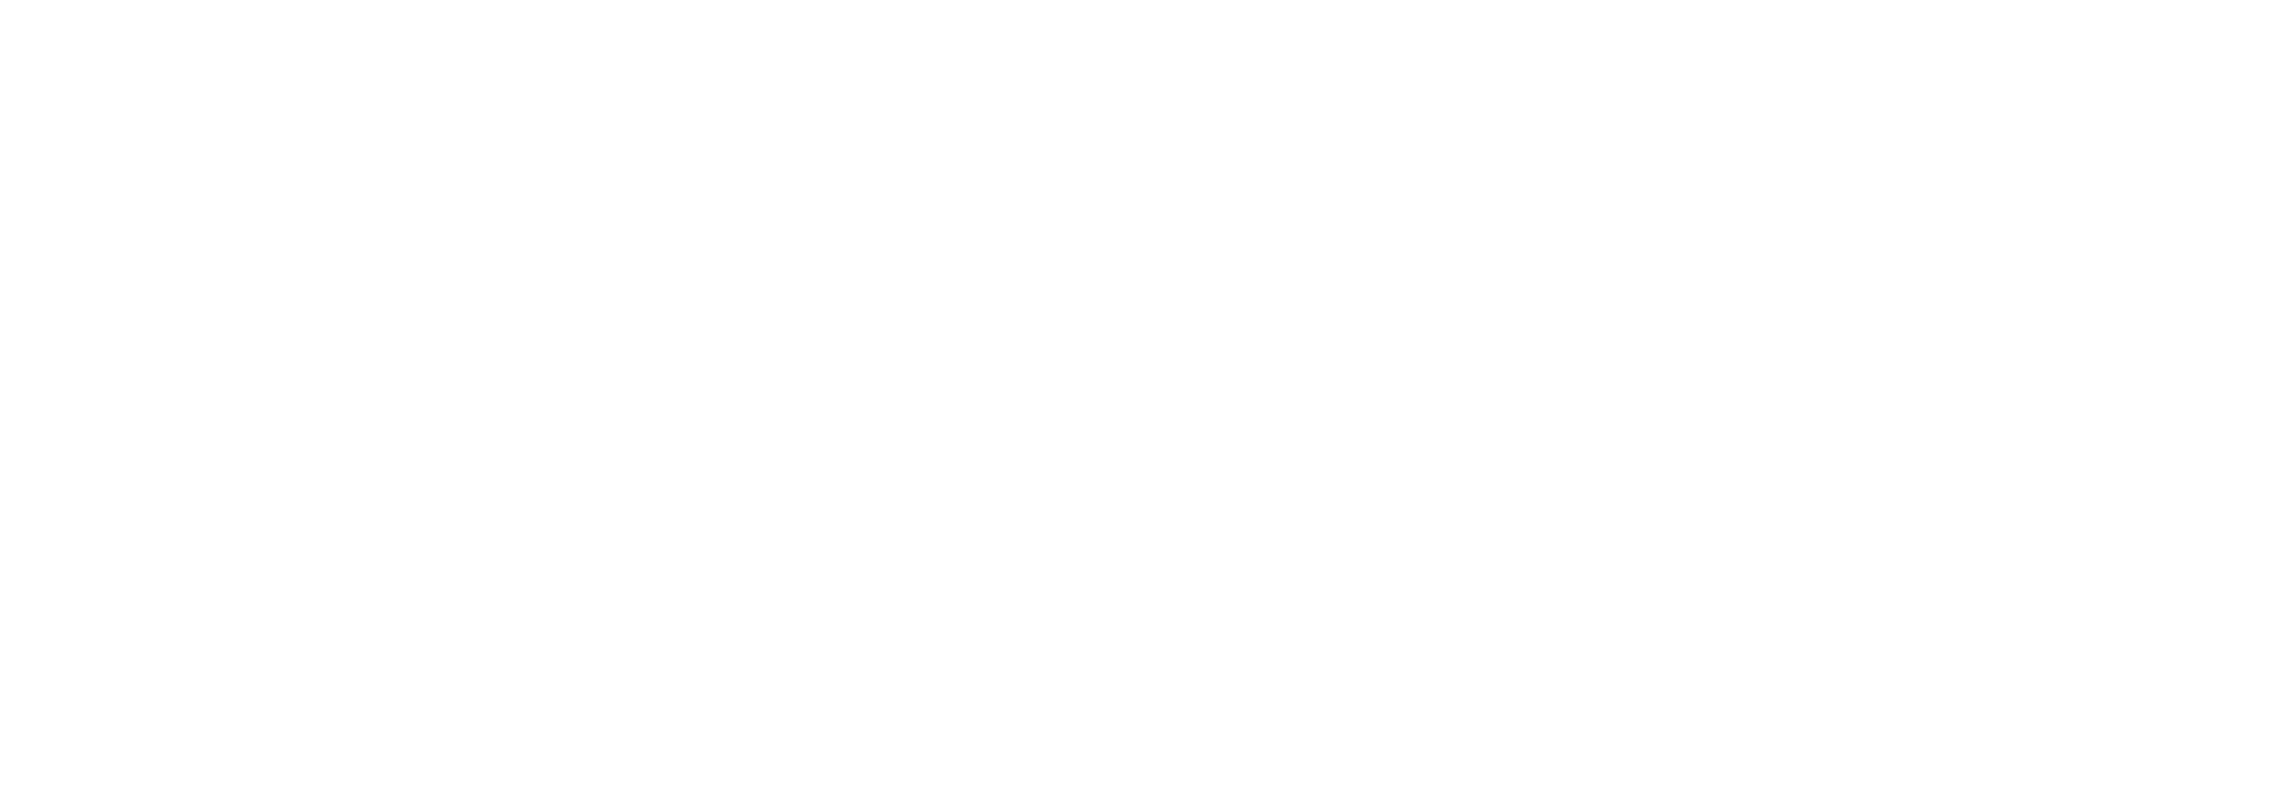 Accelerated Investor Podcast